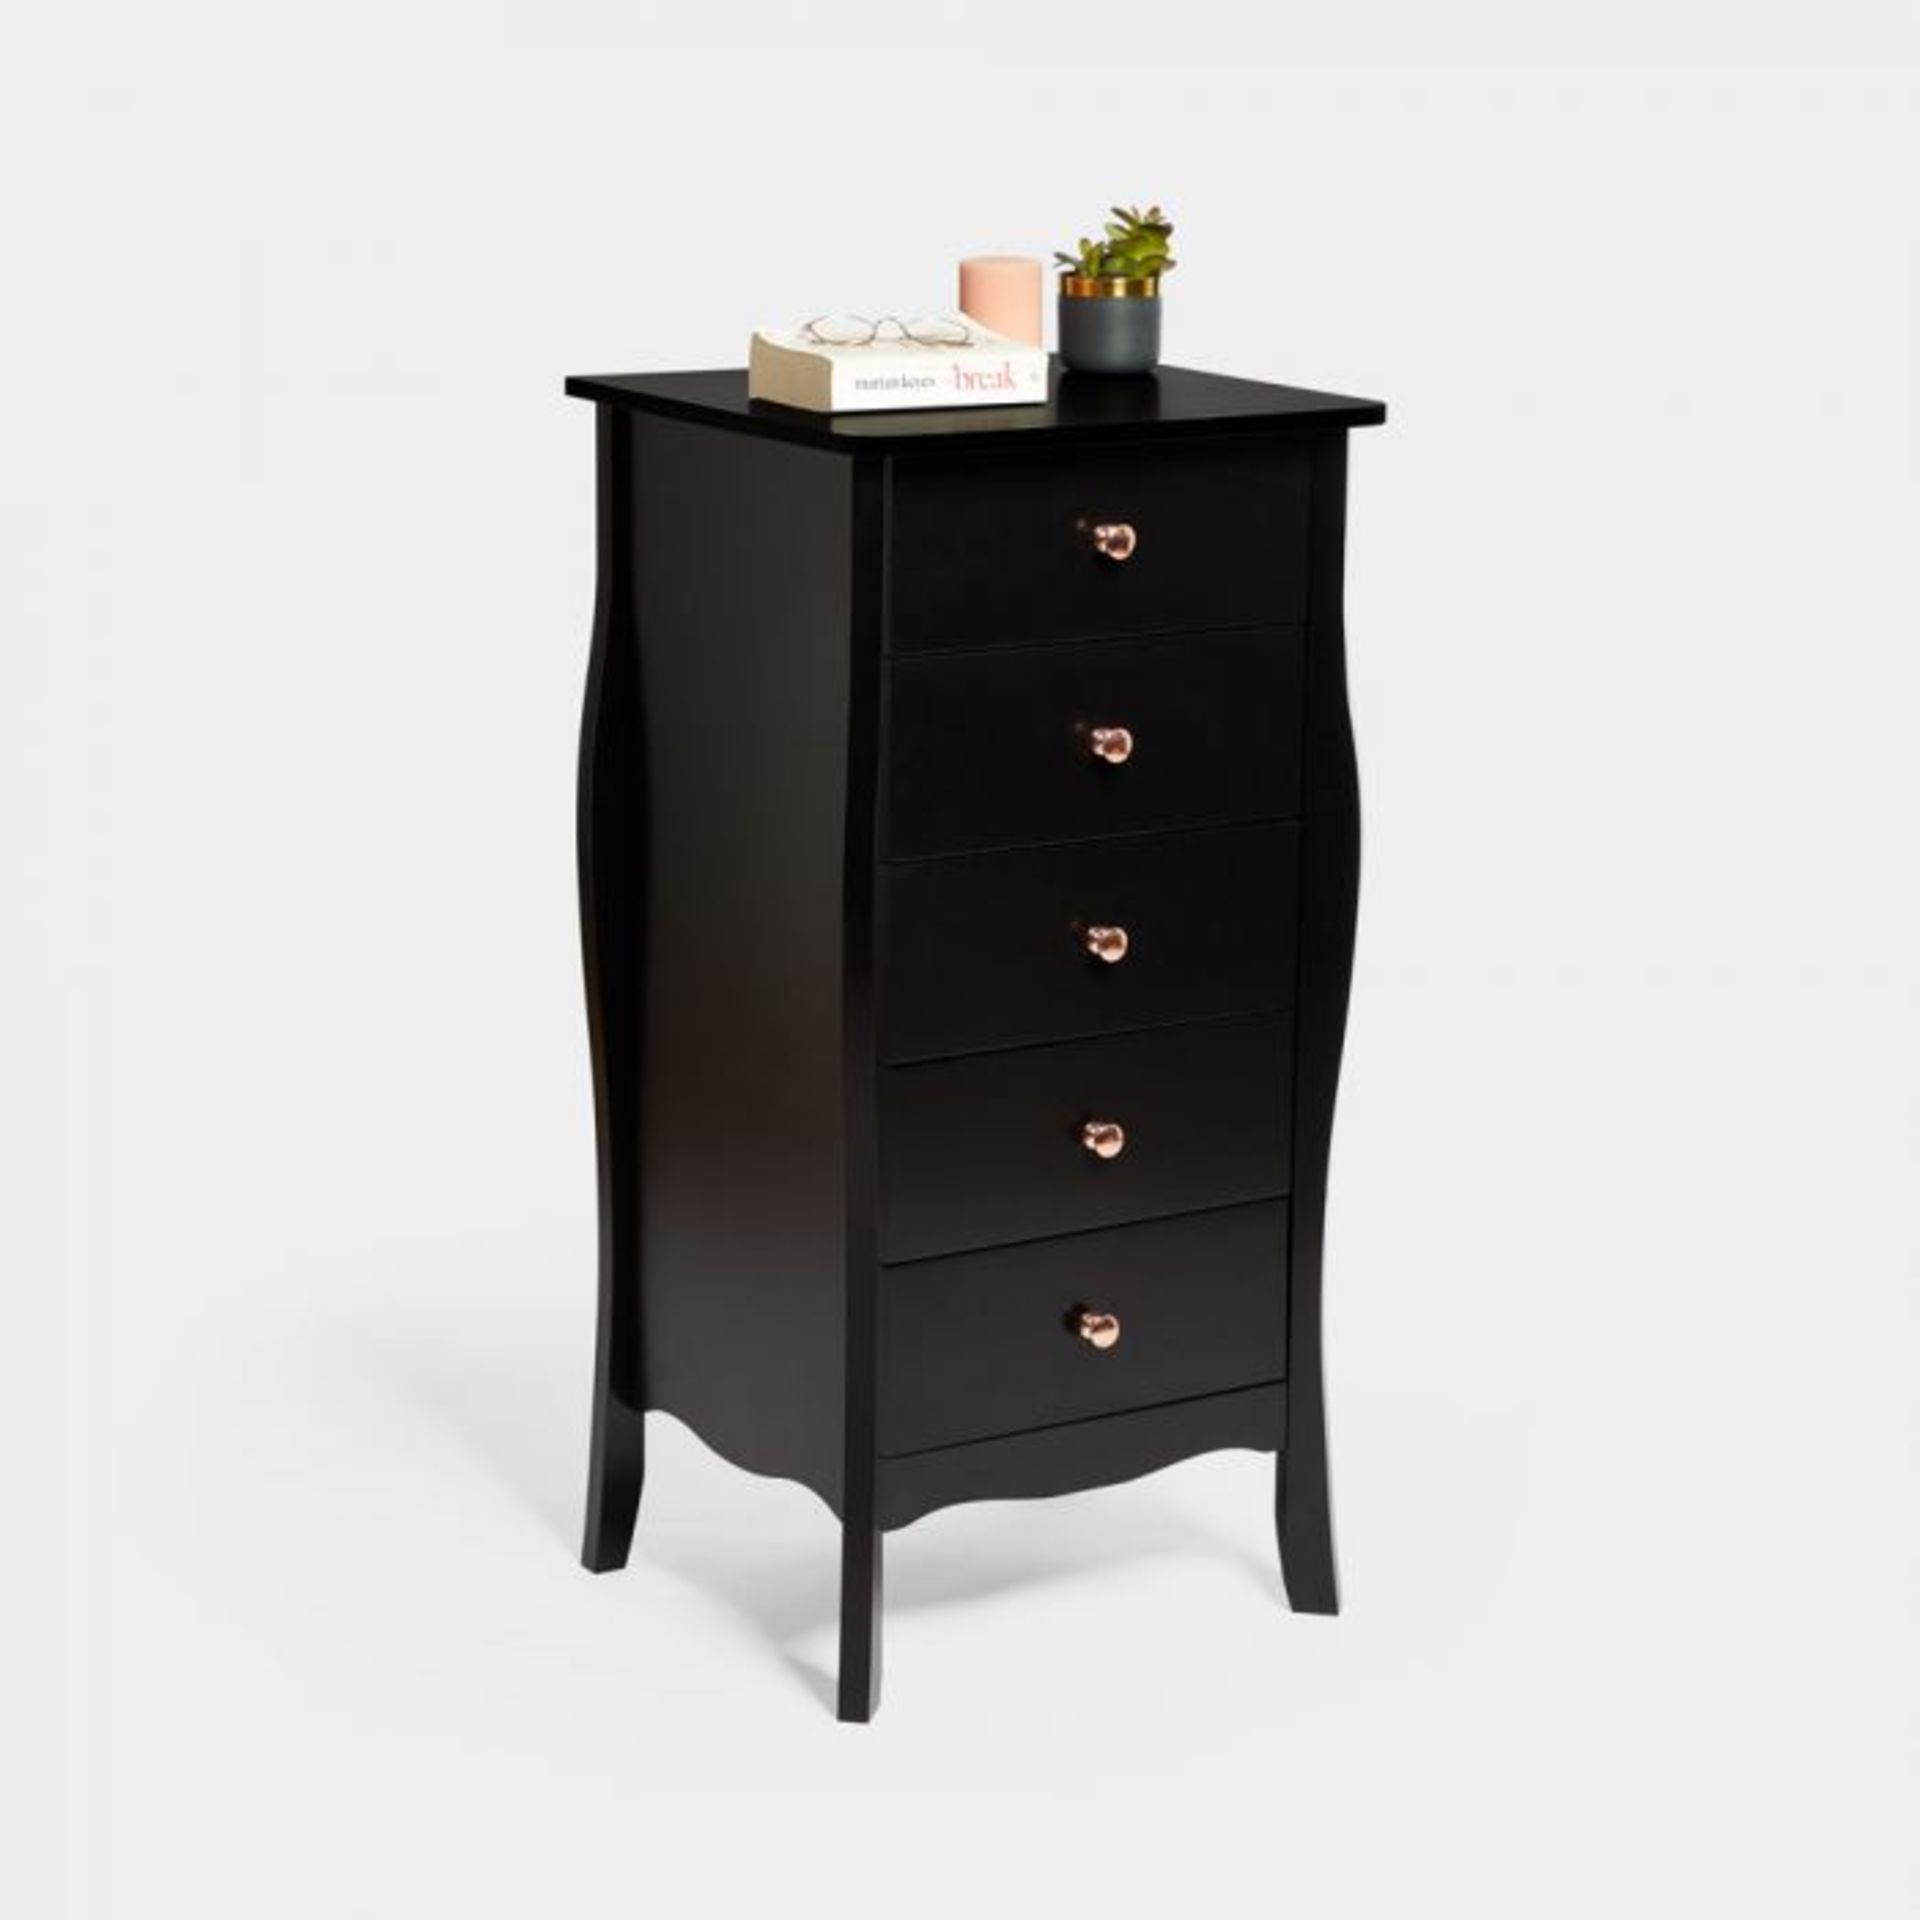 Sophia Black Narrow Chest of Drawers Introduce minimalist, sleek design into your bedroom with our